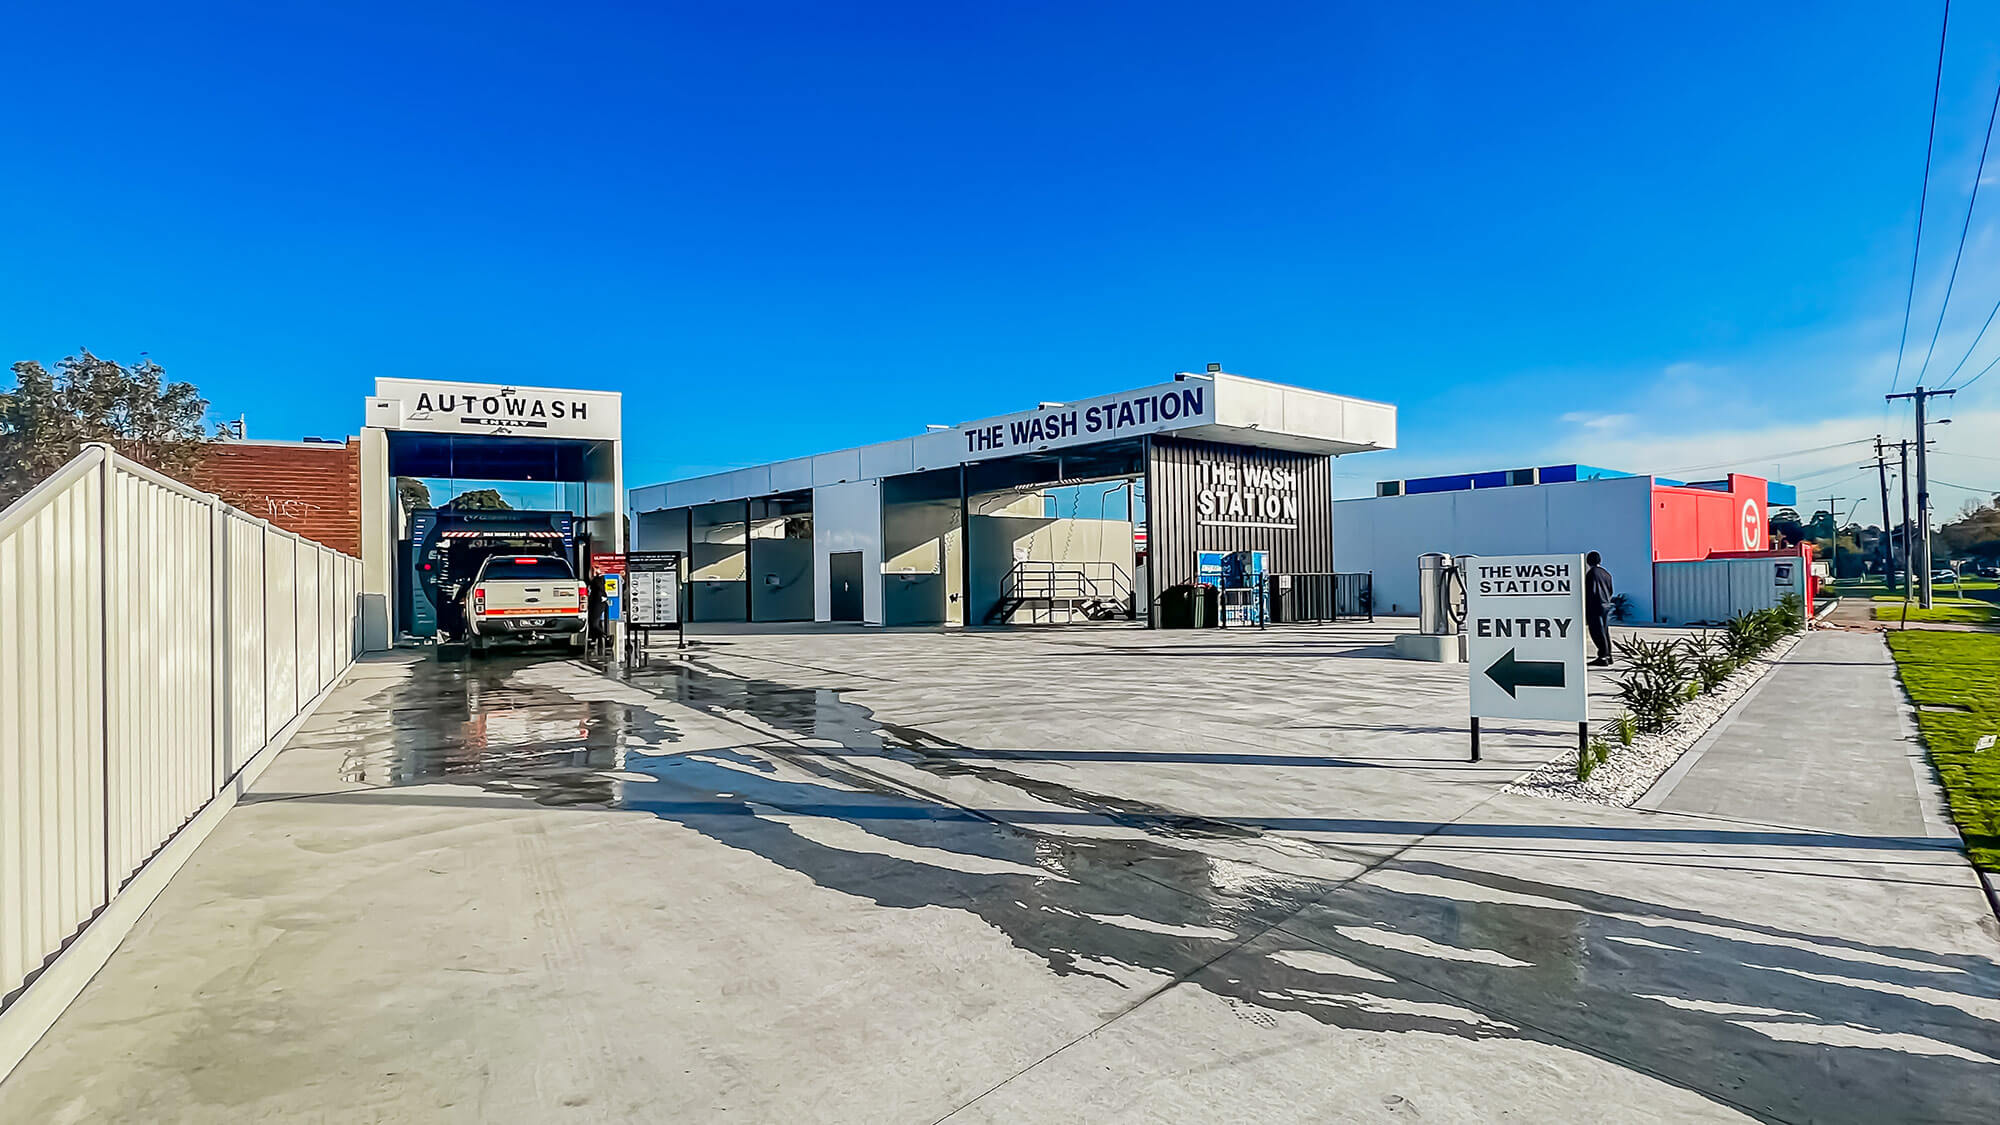 Photo of a modern new car wash business with driveway, auto car wash and bays for people to wash their own cars.